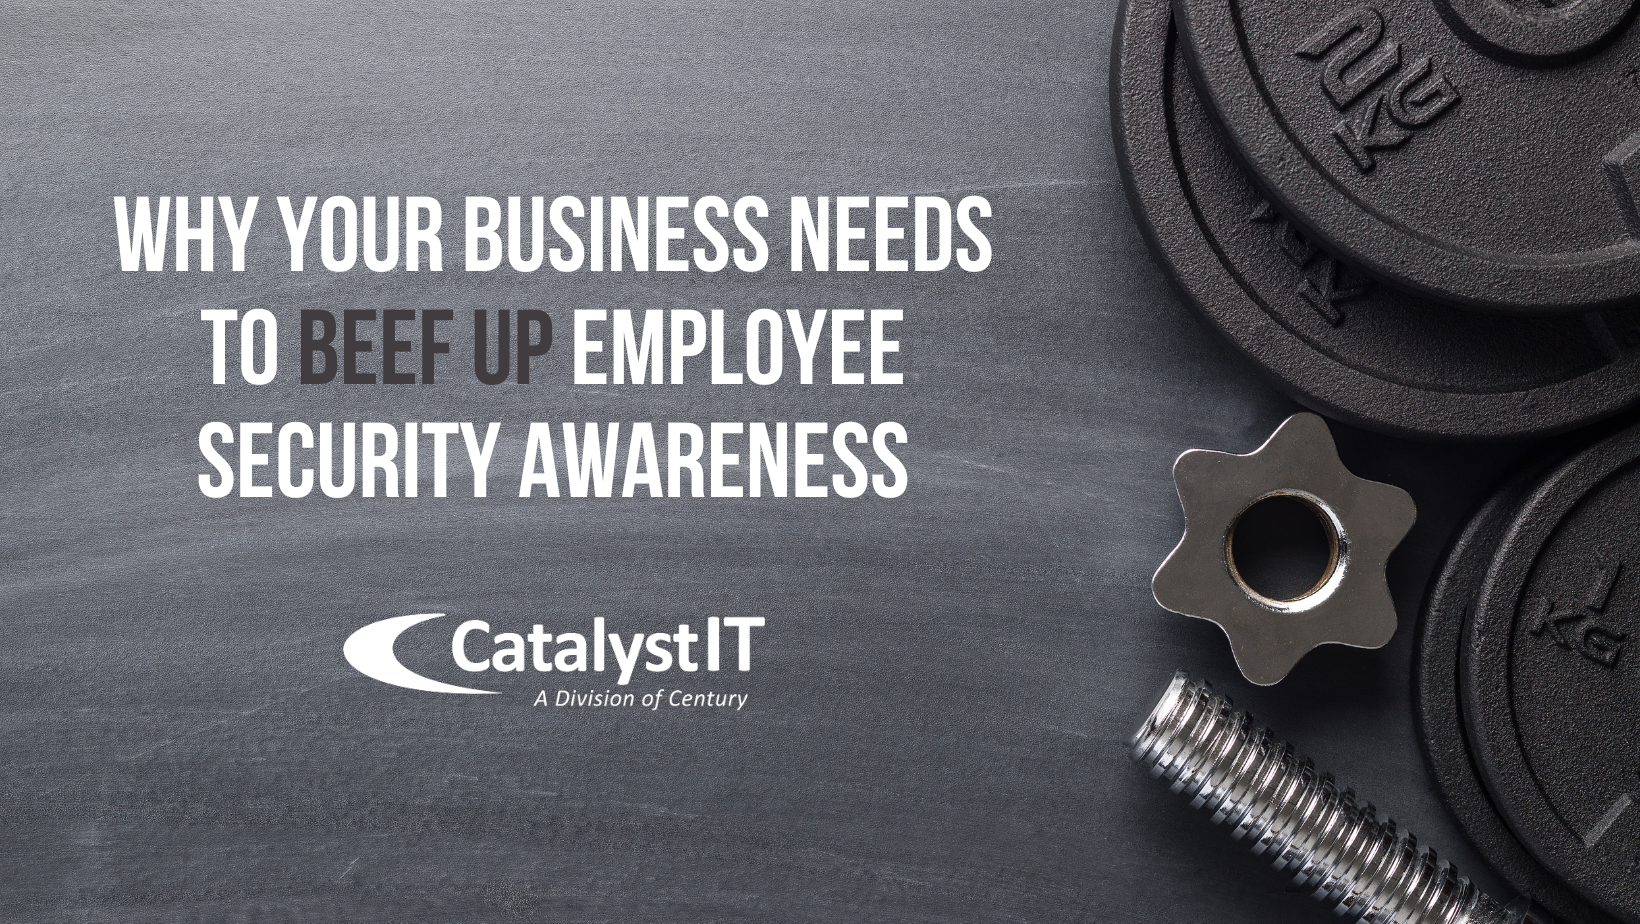 Why Your Business Needs to Beef Up Employee Security Awareness